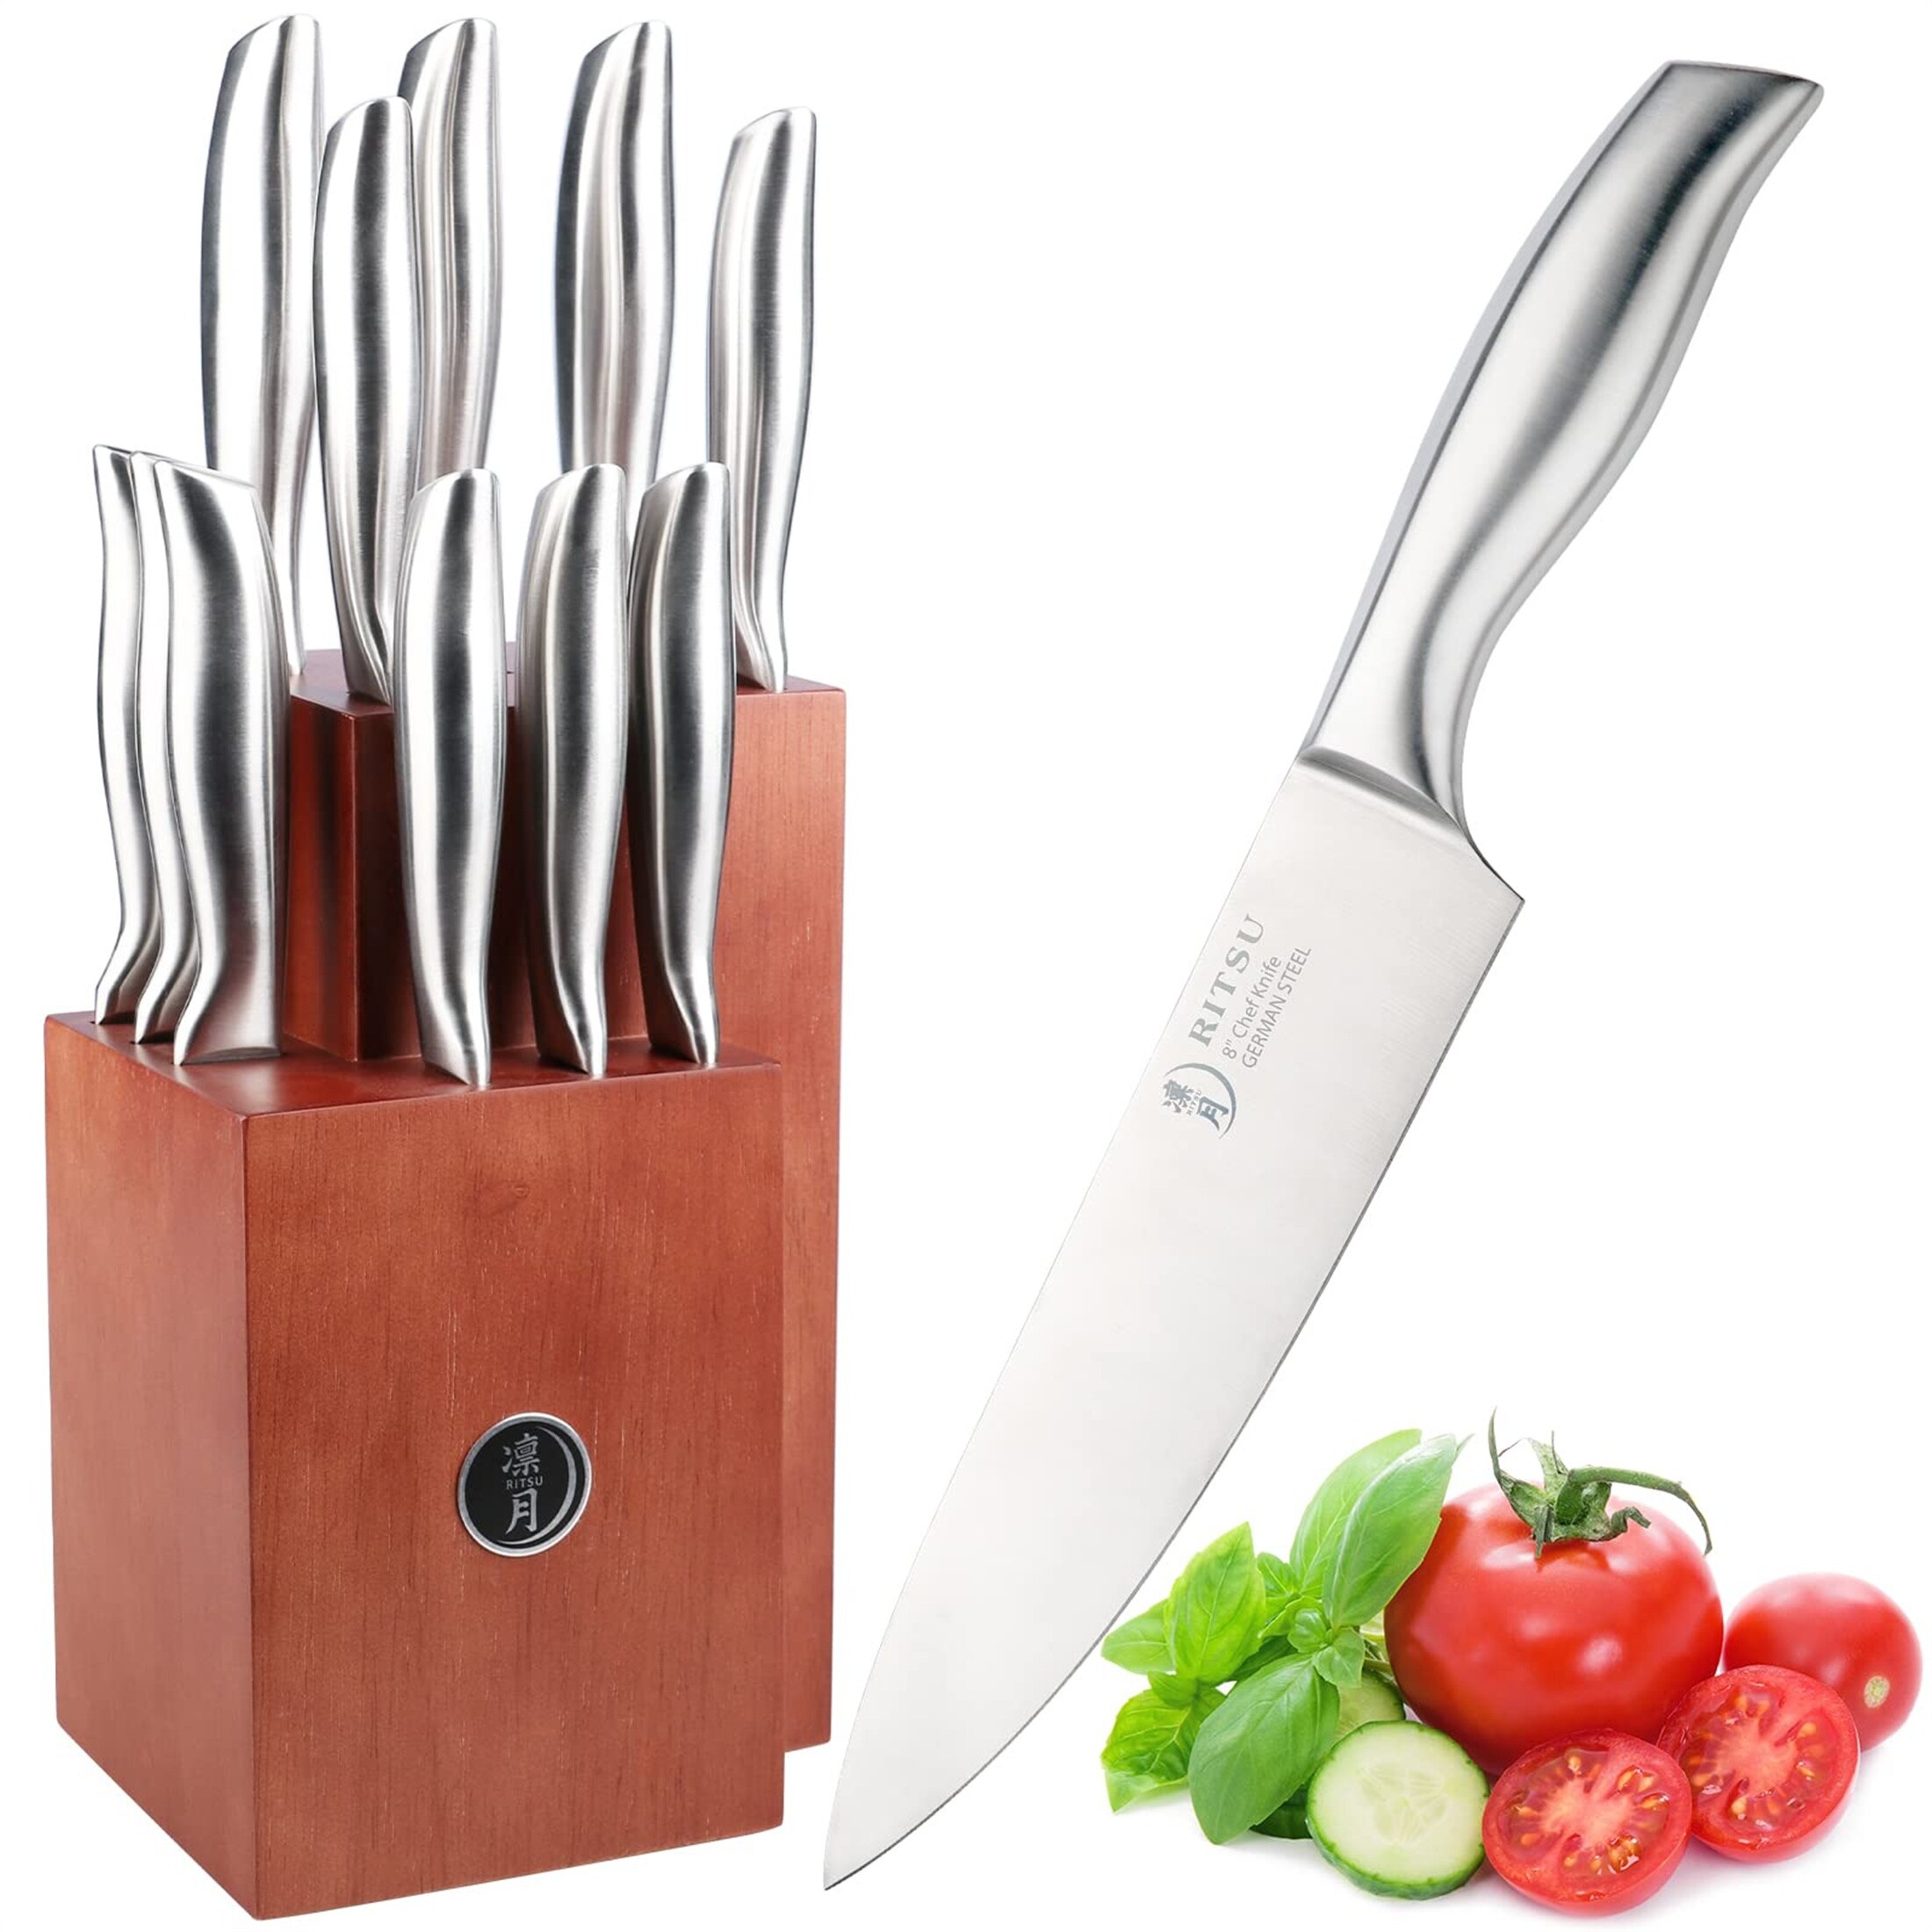 https://ak1.ostkcdn.com/images/products/is/images/direct/556d402f12c4f3400863932a5c300ab2c37dddd7/12-Pieces-German-Steel-Knife-Set-With-Block-And-Steak-Knives.jpg